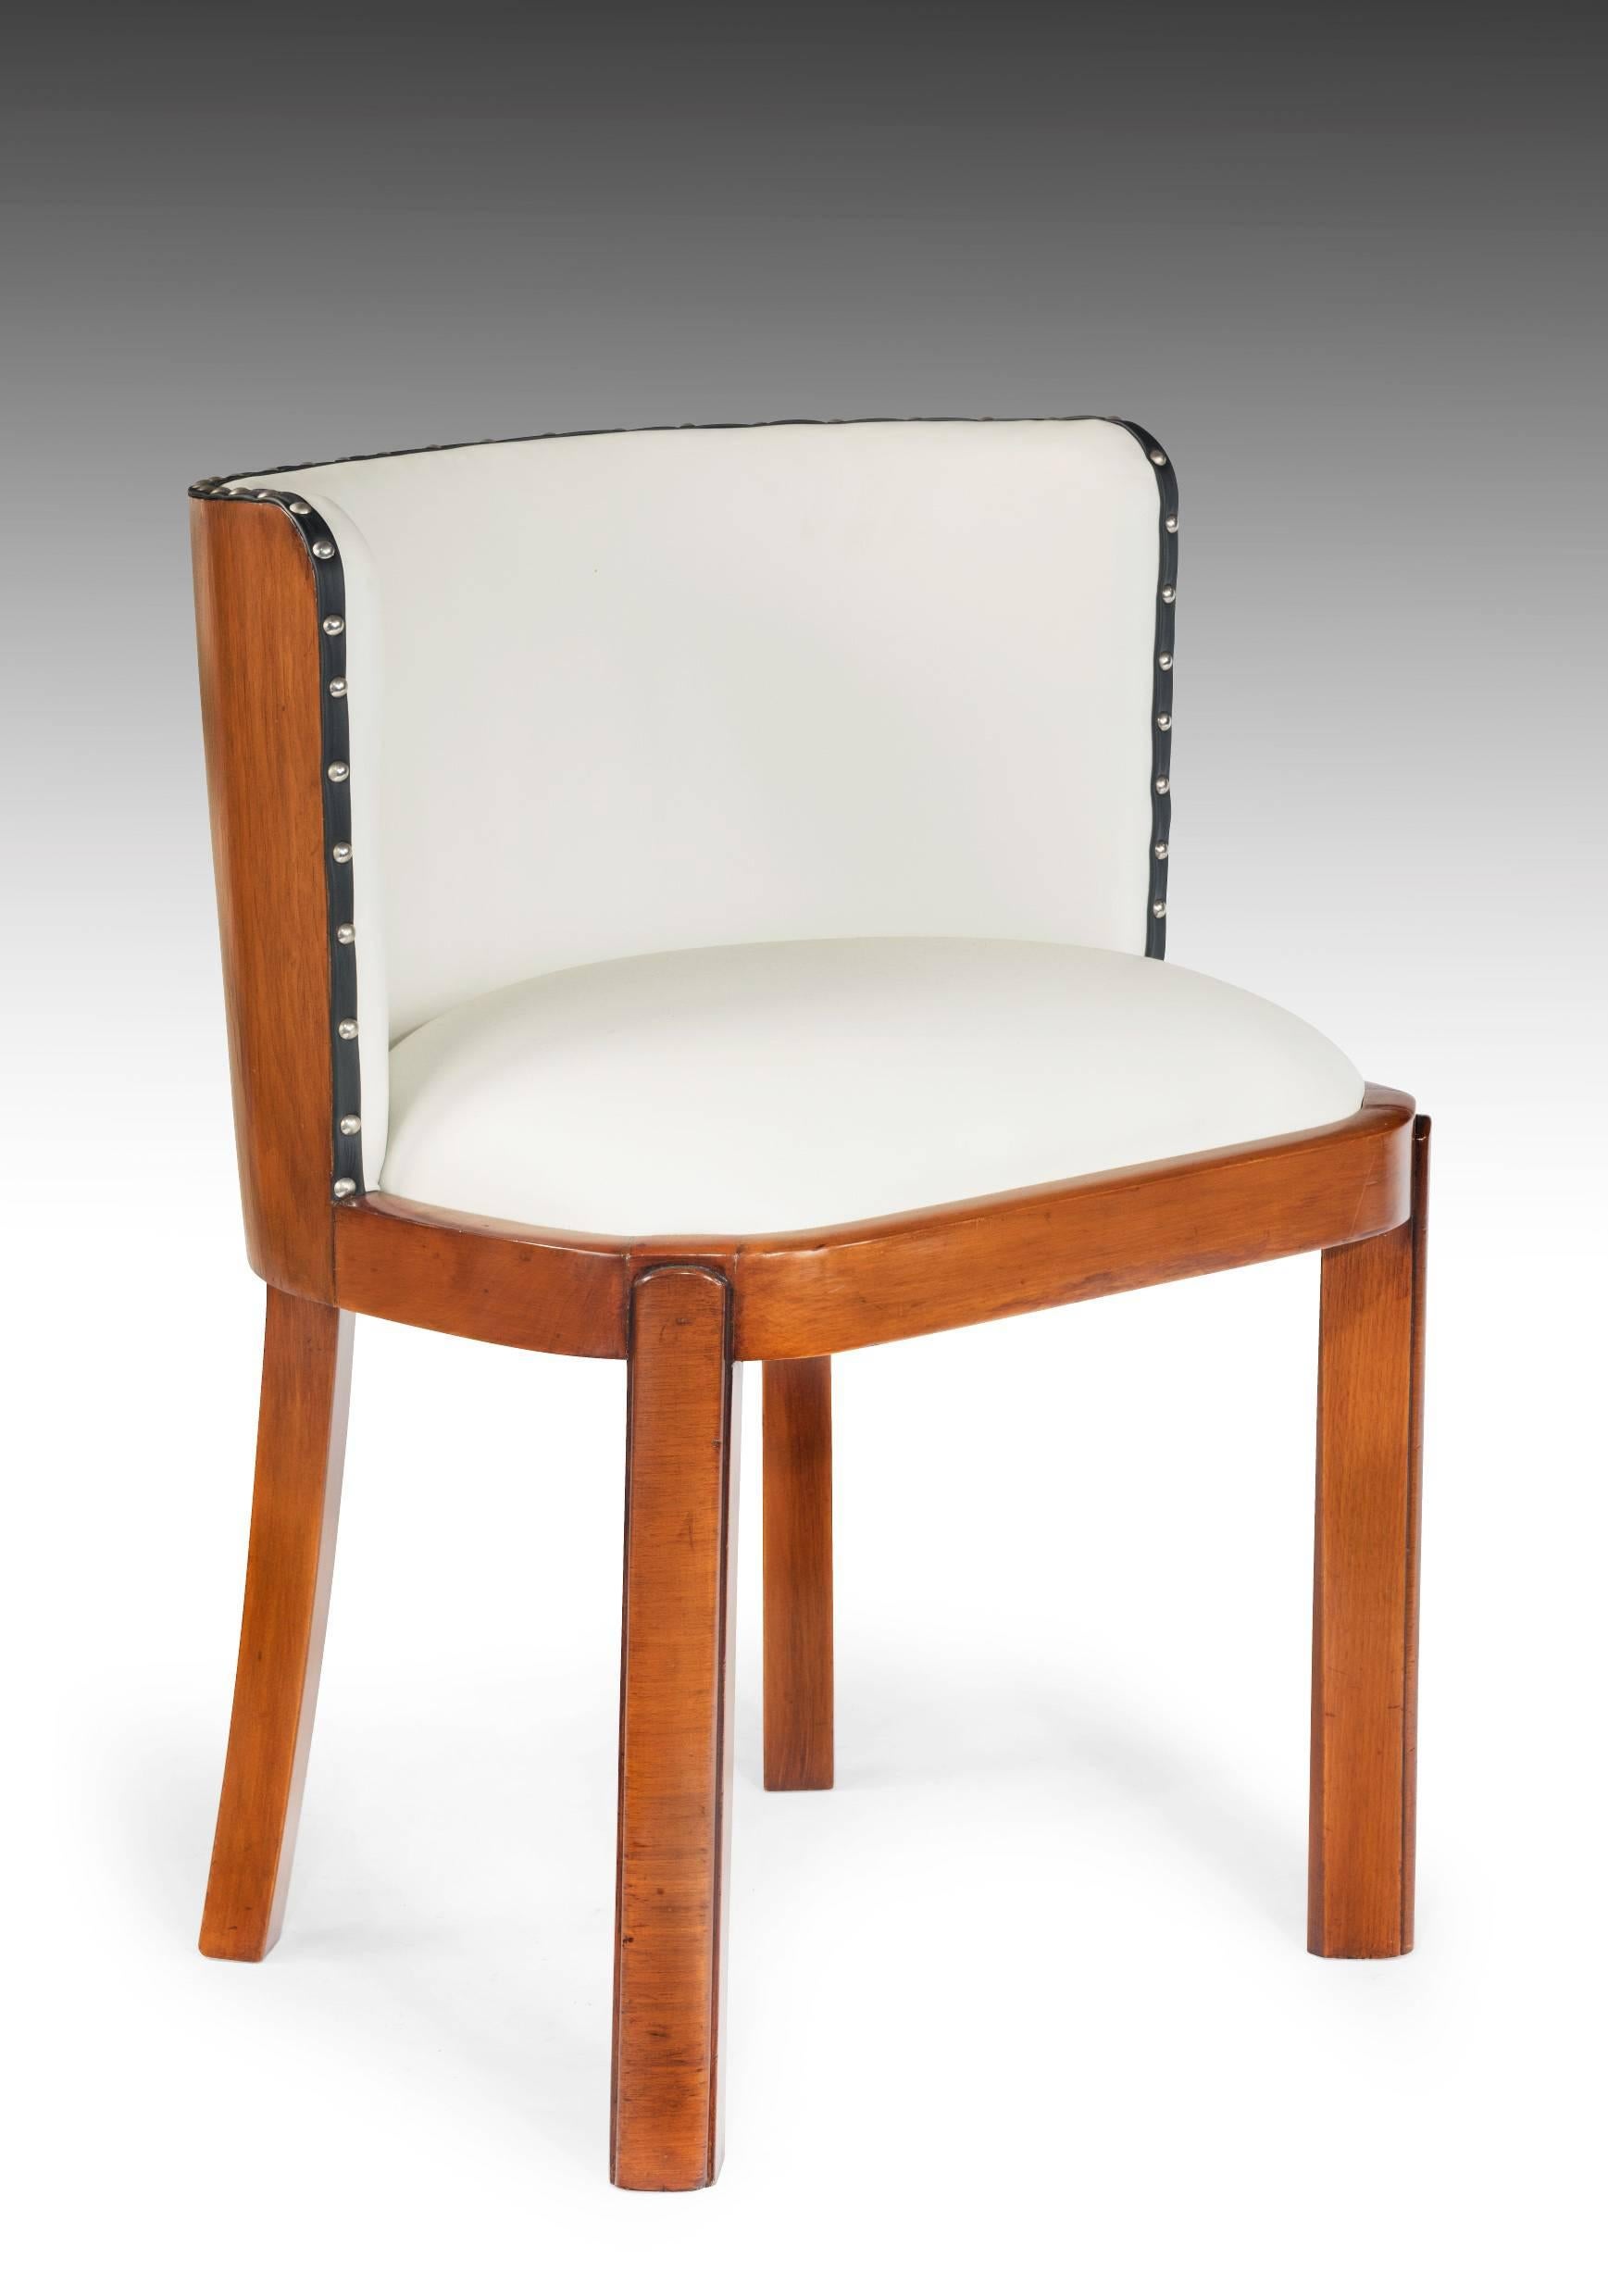 Mid-20th Century Set of Four Walnut and Leather Art Deco Chairs